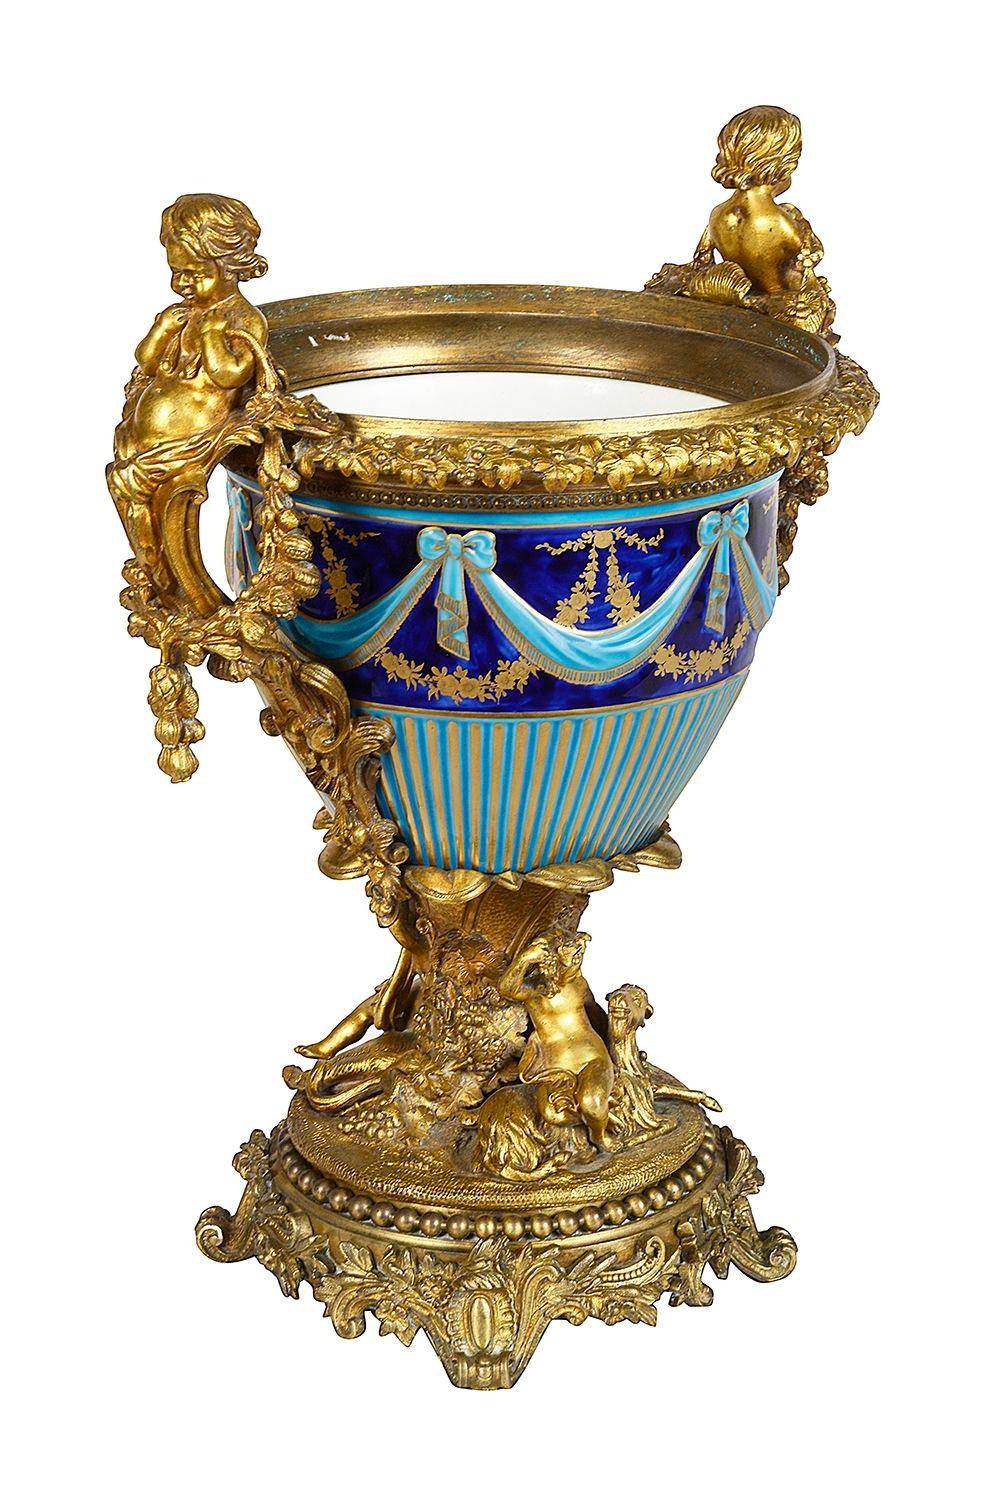 A very good quality 19th century French cobalt and turquoise blue majolica porcelain urn, with wonderful gilded ormolu mouldings and mounts of putti holding garlands of flowers, among grape vines.
Batch 76 60676 DTNSK